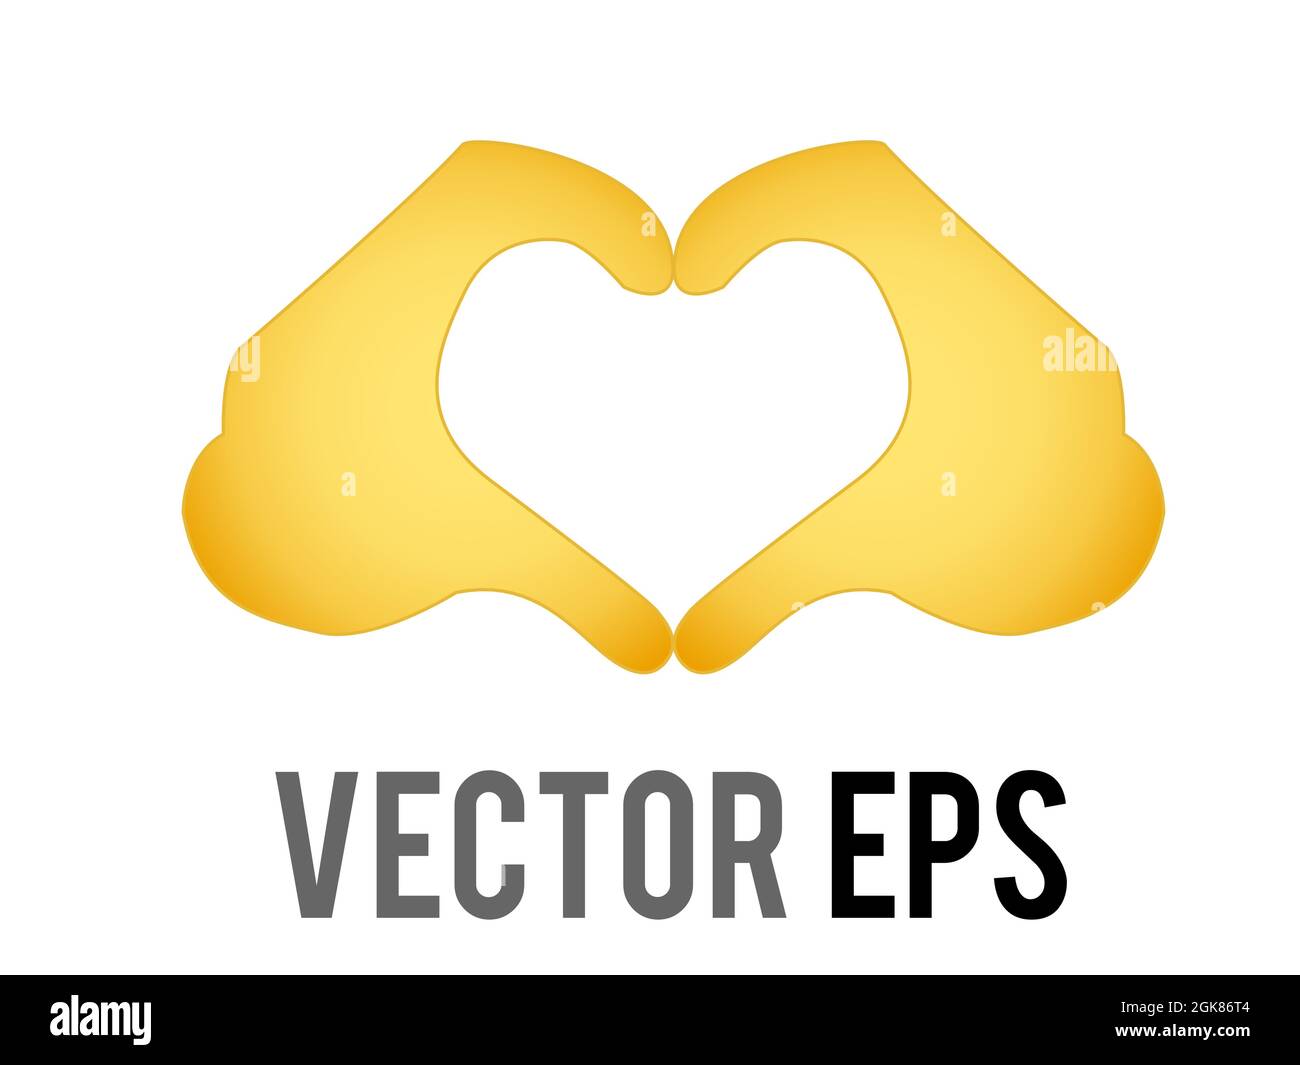 The vector gradient yellow two hands forming a heart shape icon,sed to express love and support Stock Vector